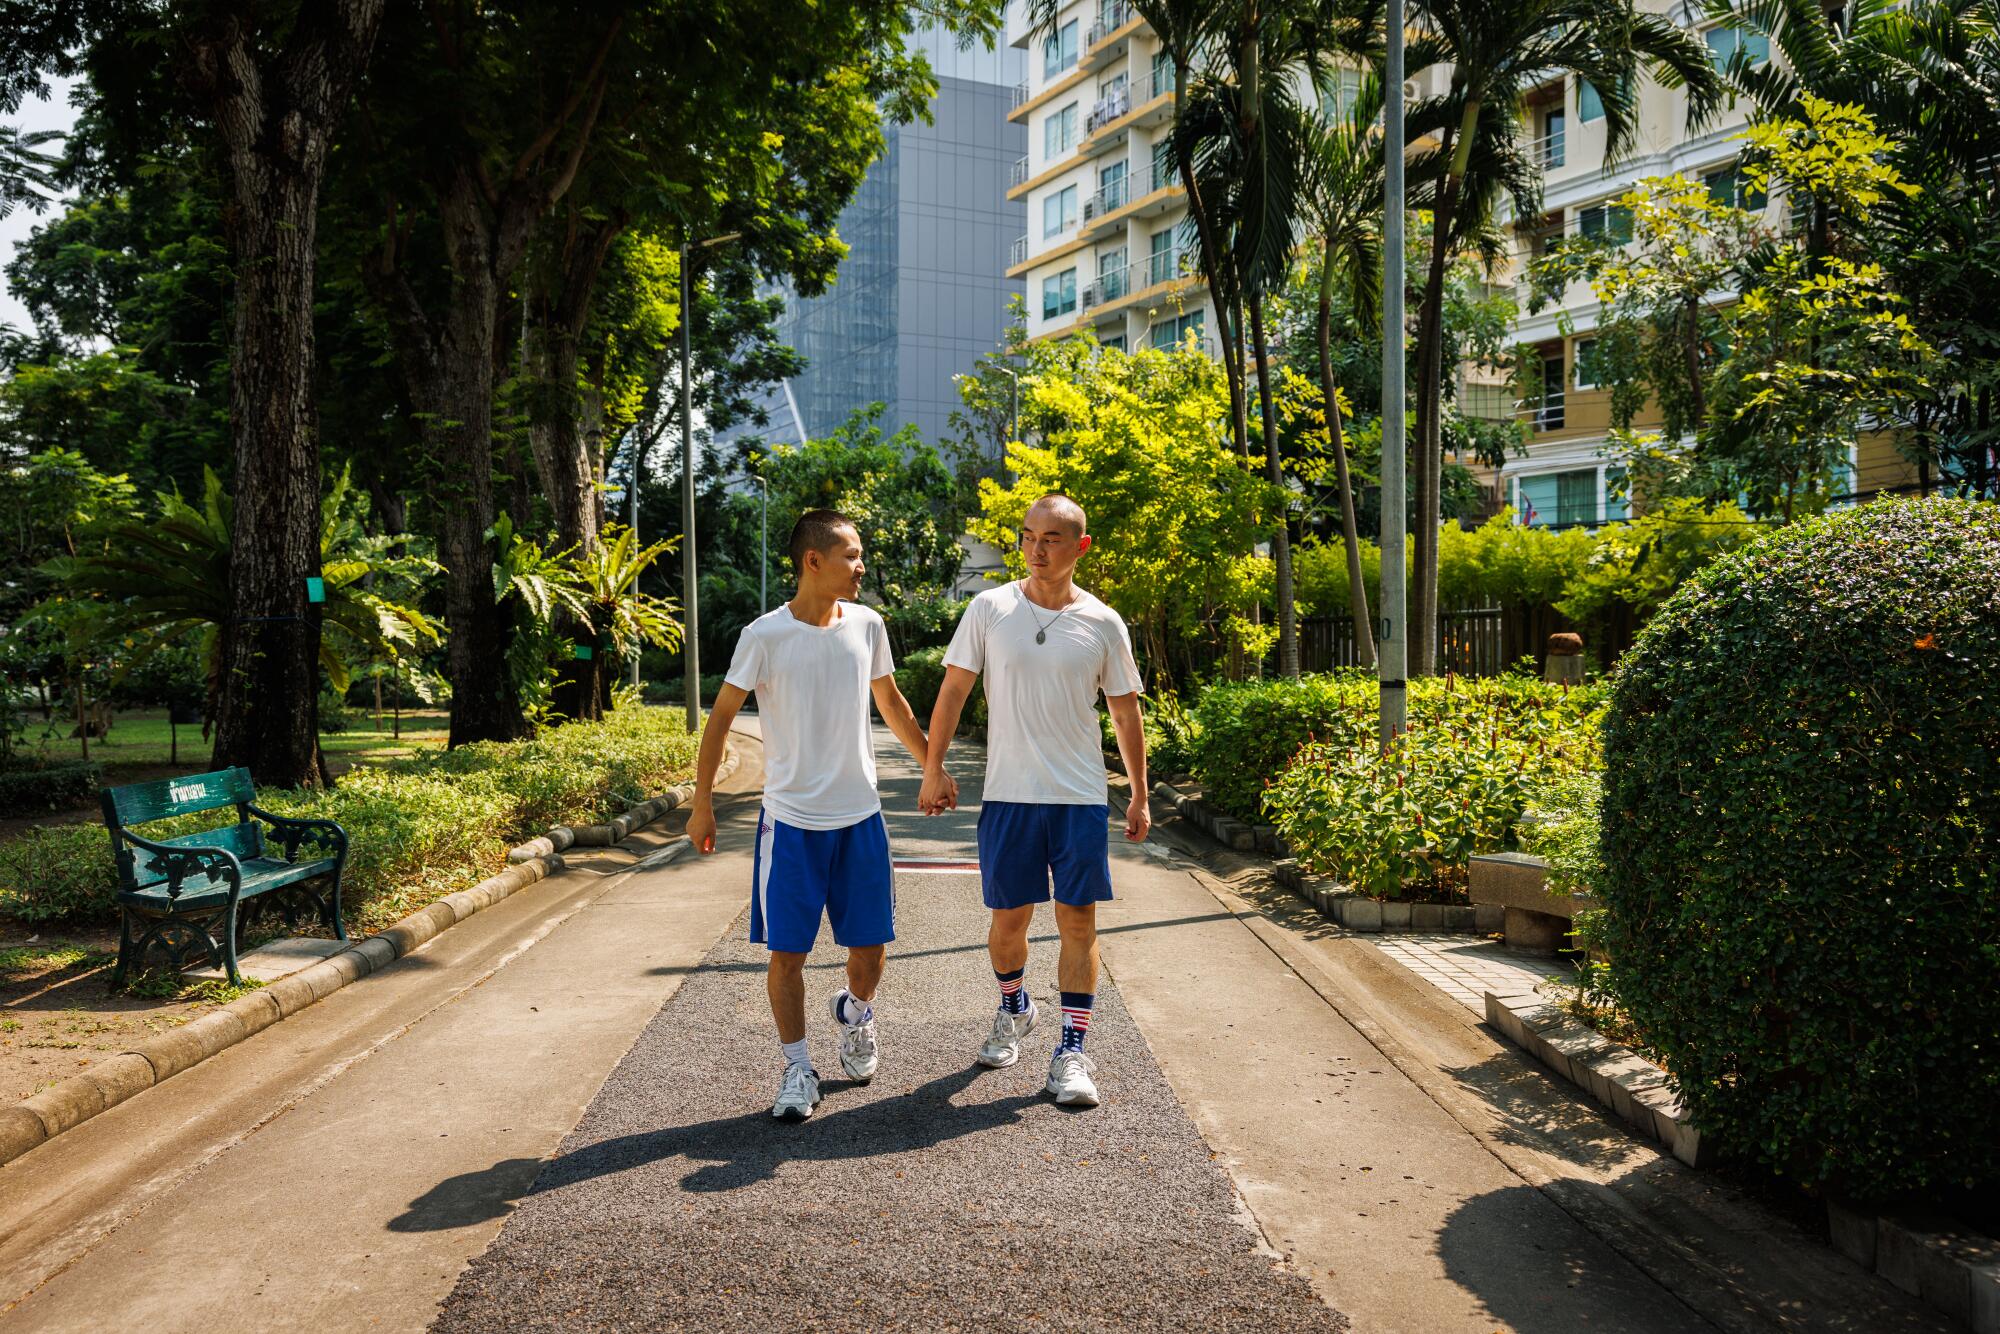 Wilfred Wu and Jeffery Hu walk through Santiphap Park after an outdoor workout on May 5, 